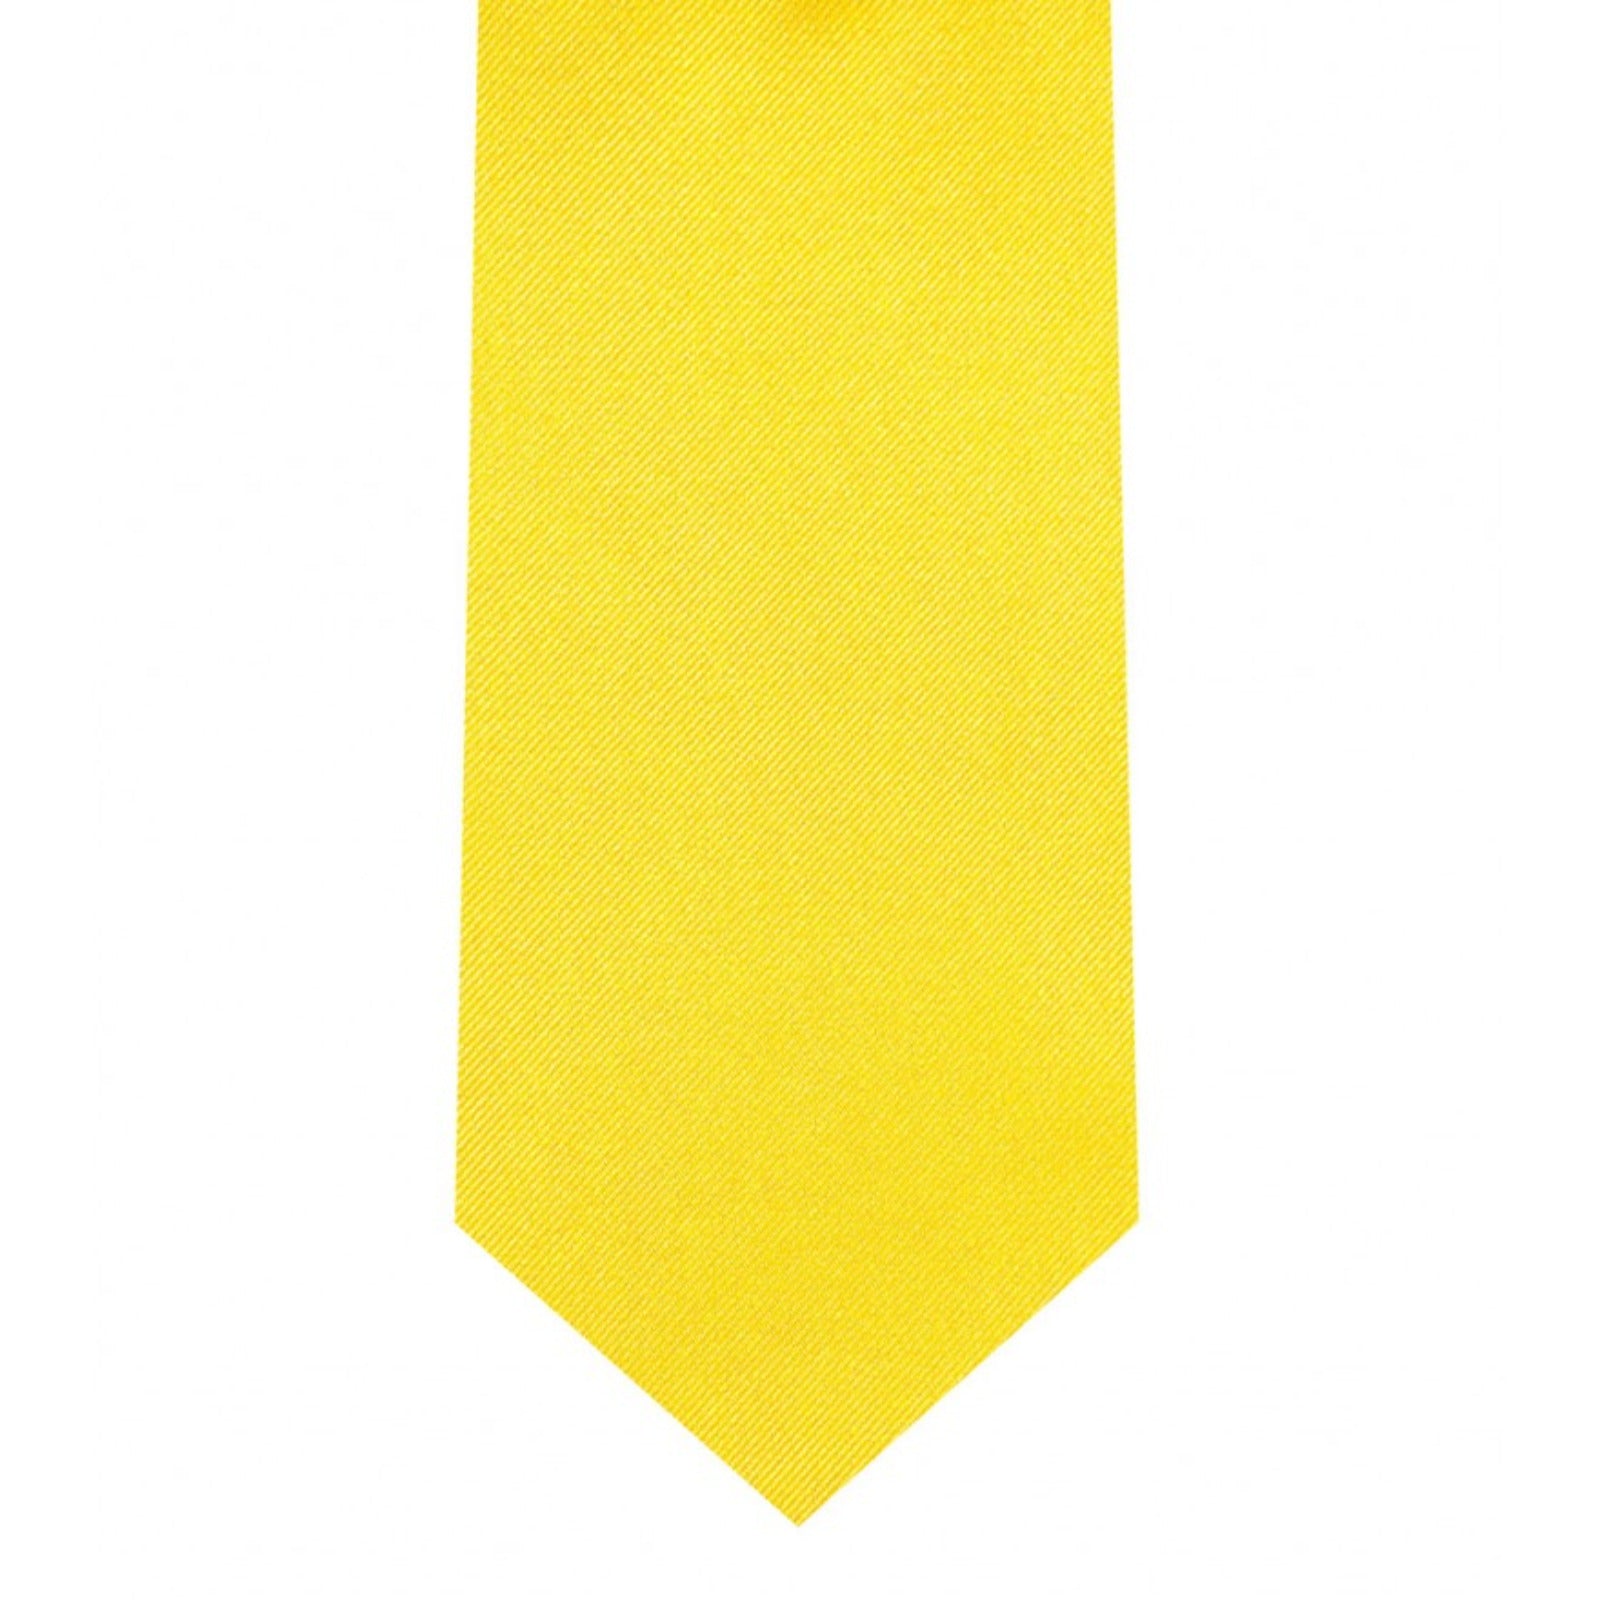 Classic Yellow Tie Skinny width 2.75 inches With Matching Pocket Square | KCT Menswear 